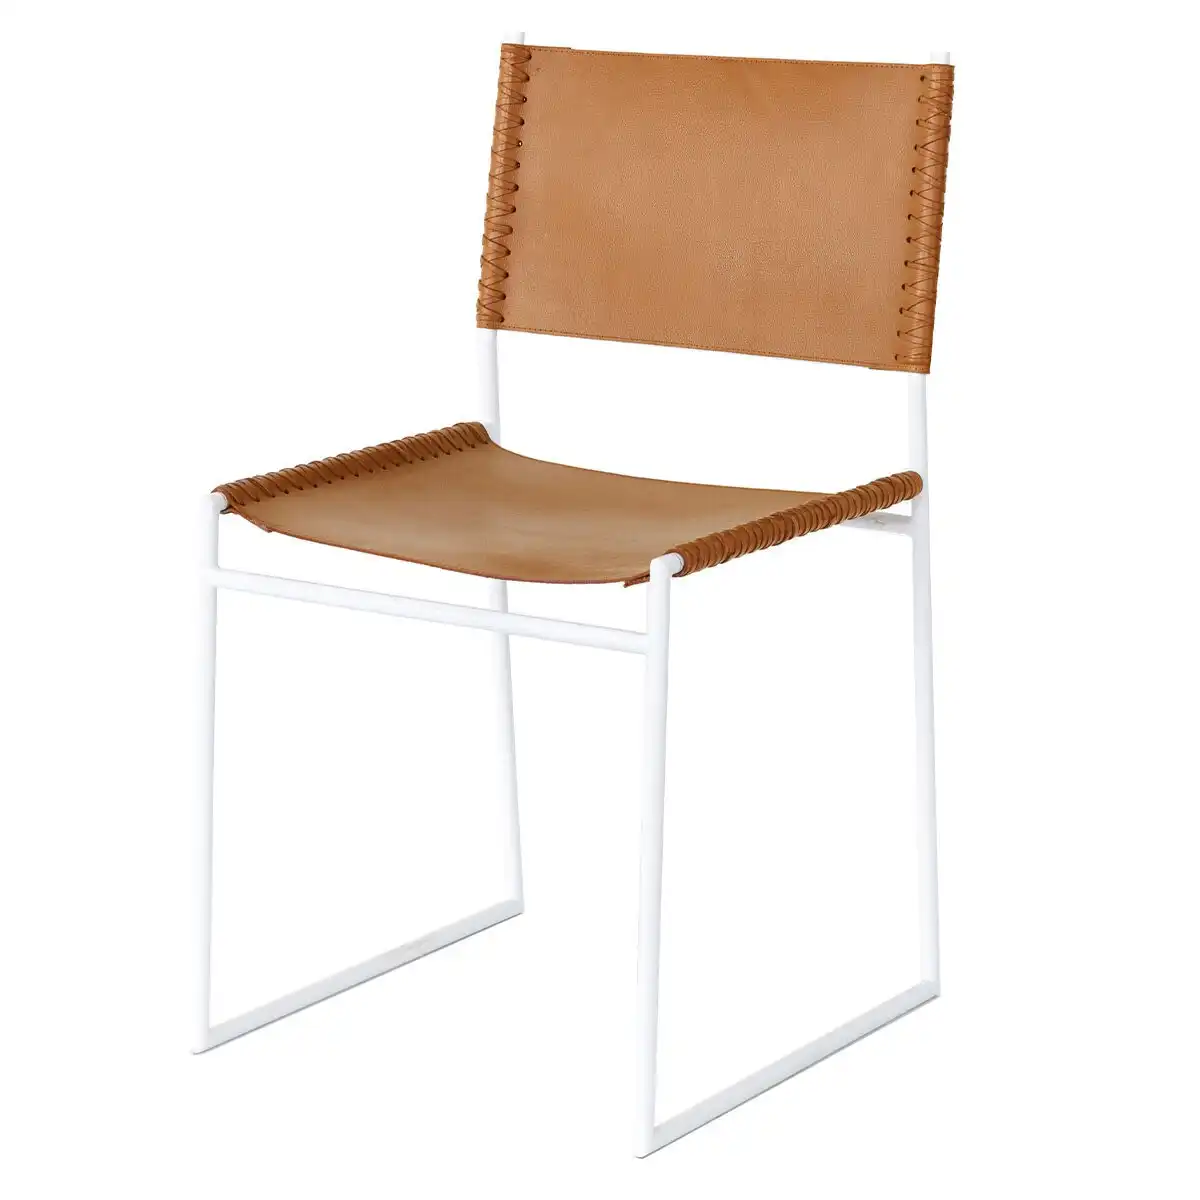 Reddie Willy Sling Dining Chair Tan Top White Frame